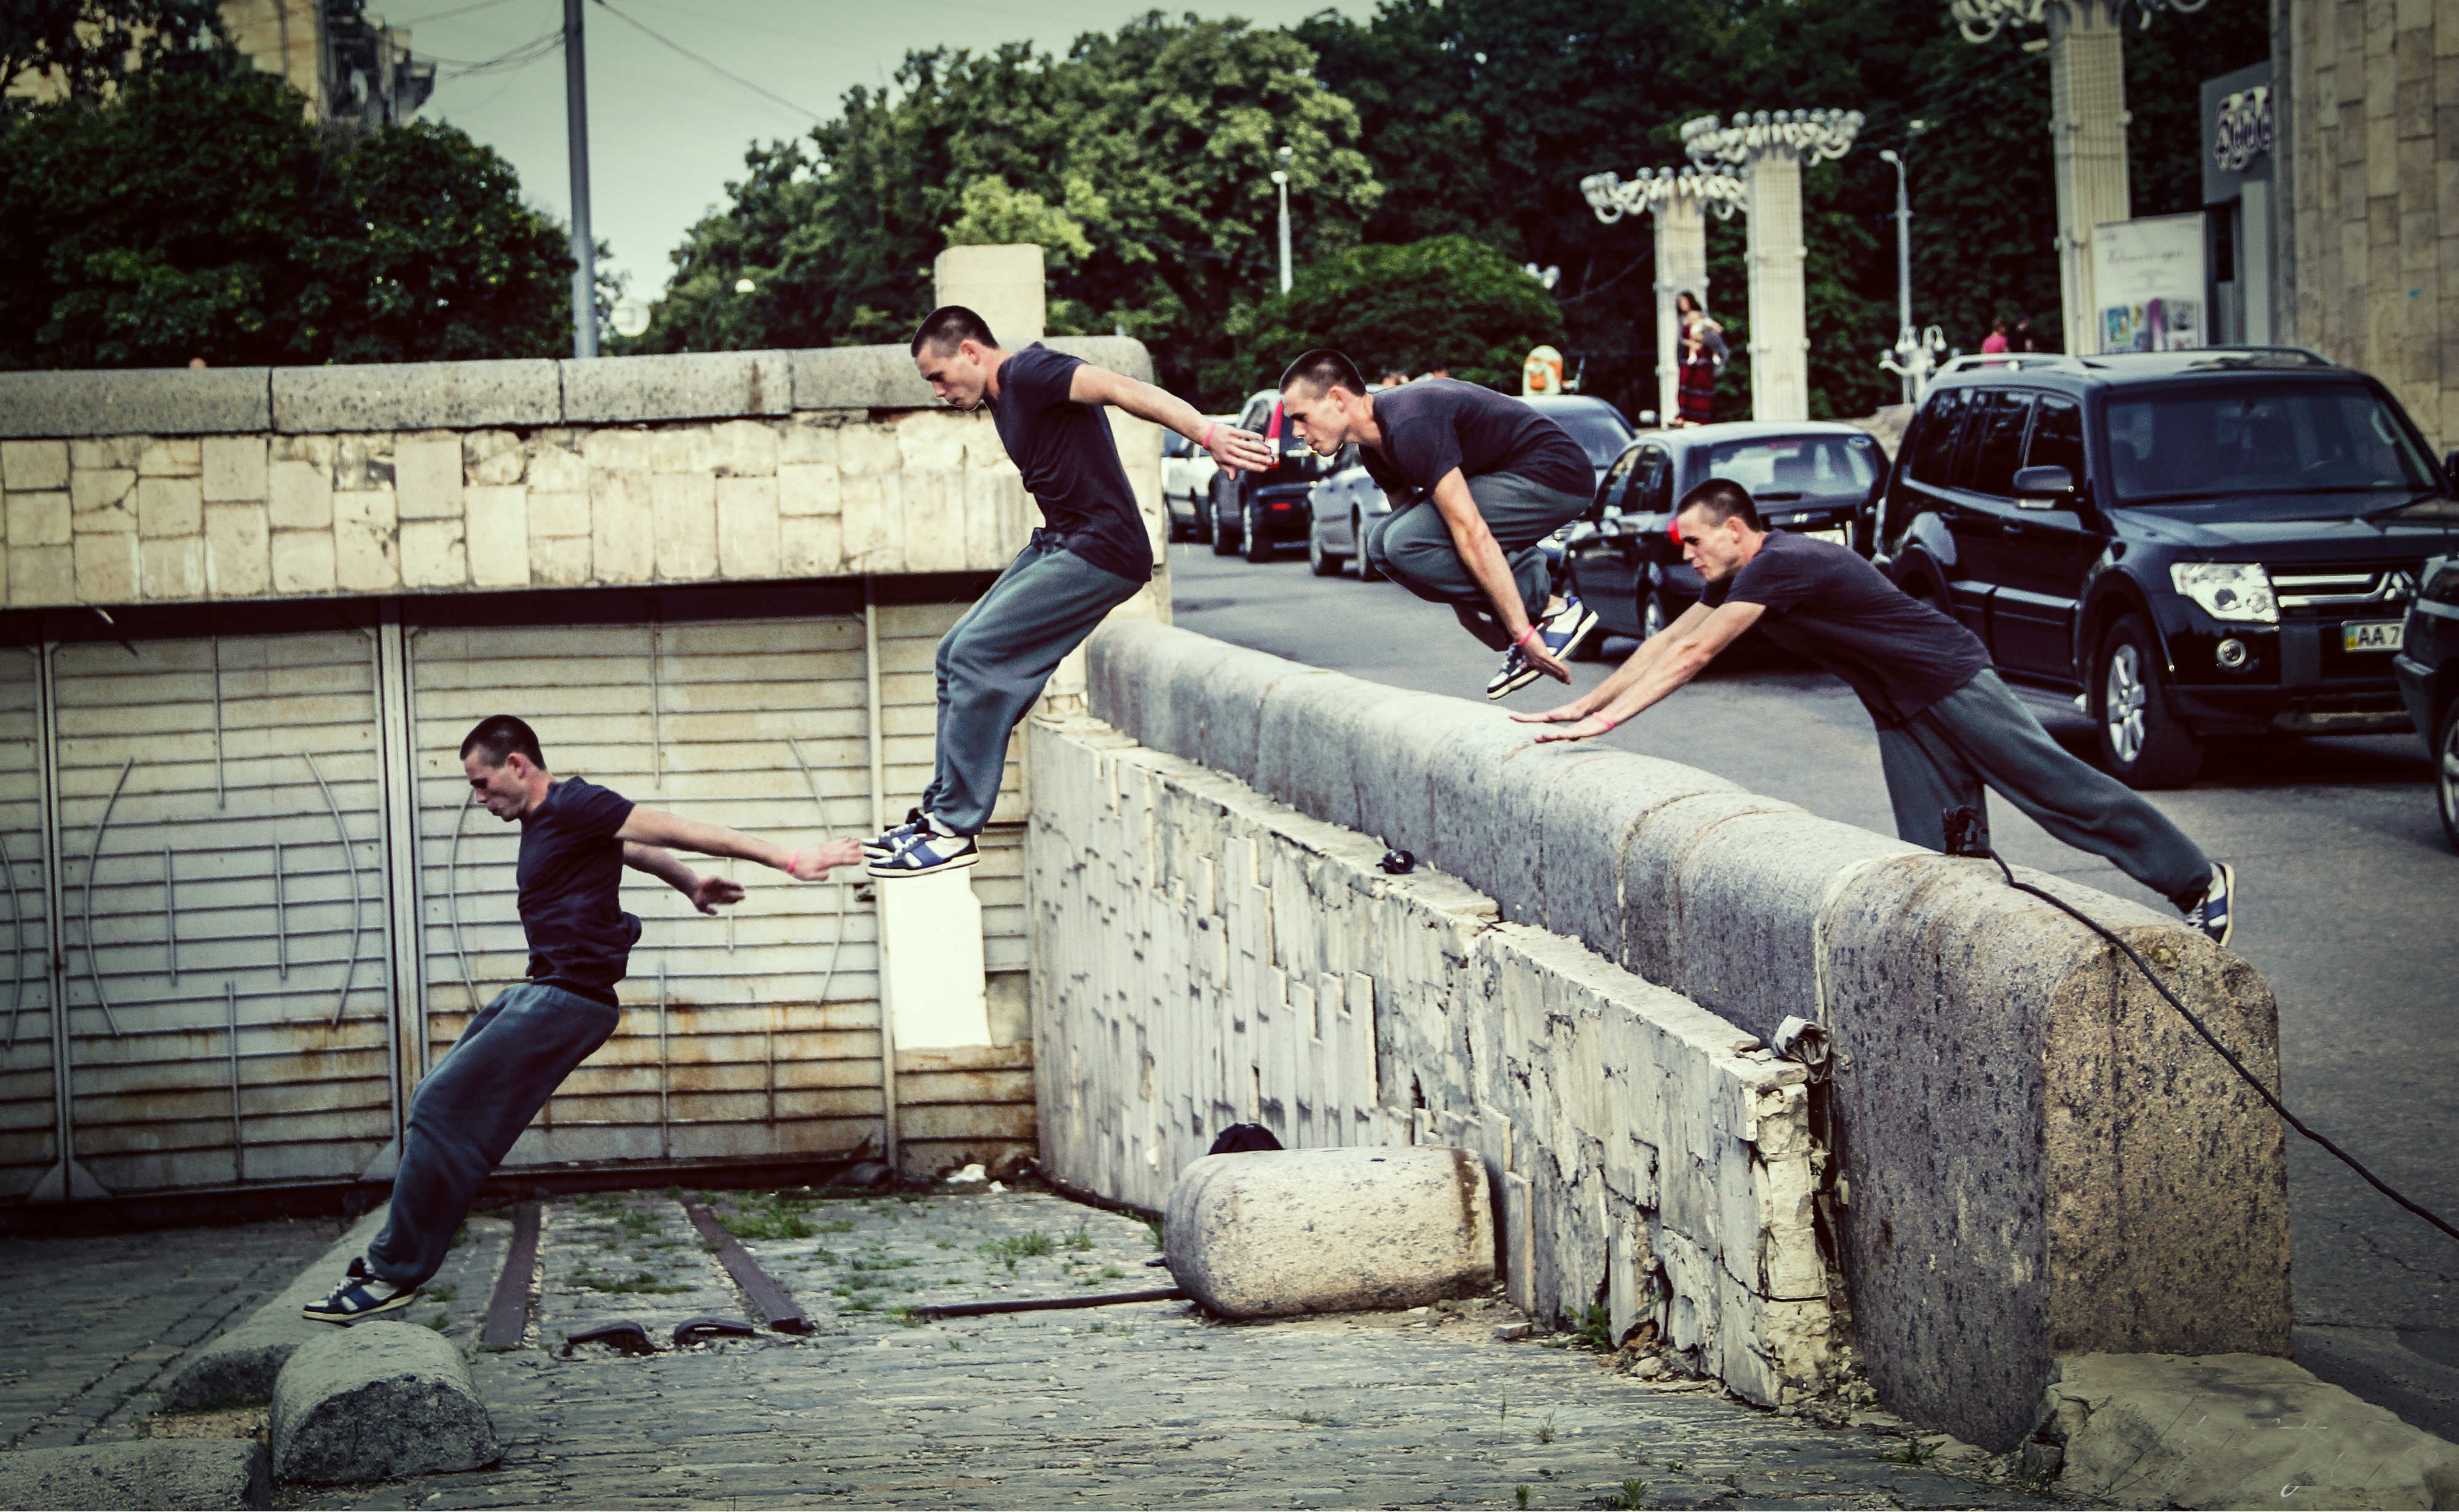 Storyboard jump in Parkour wallpapers and images - wallpapers ...